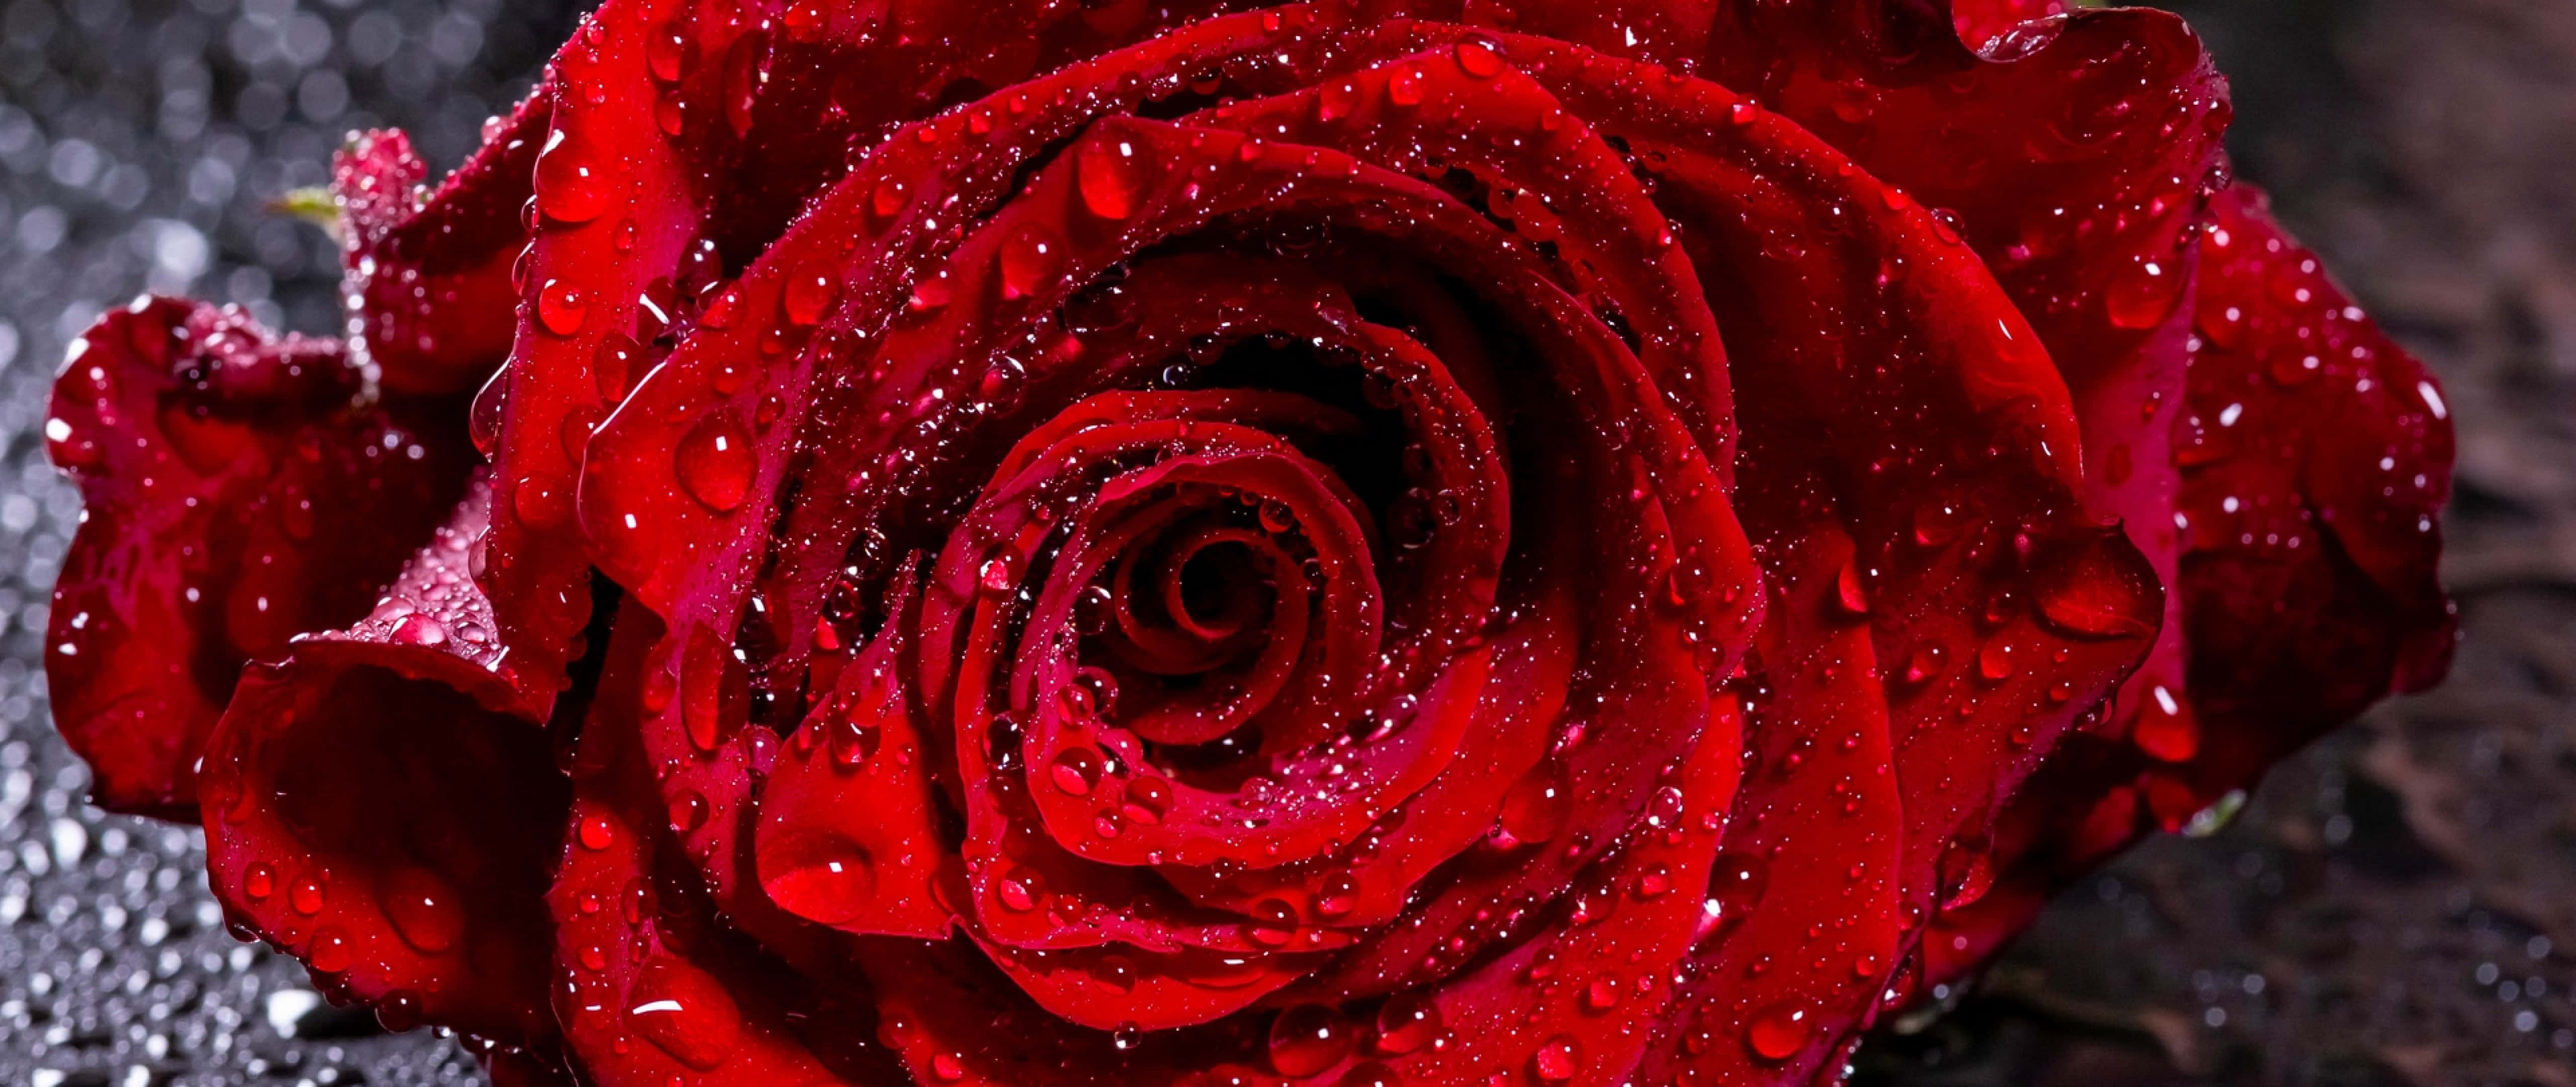 Download Valentines Day Roses Wallpaper | Wallpapers.com